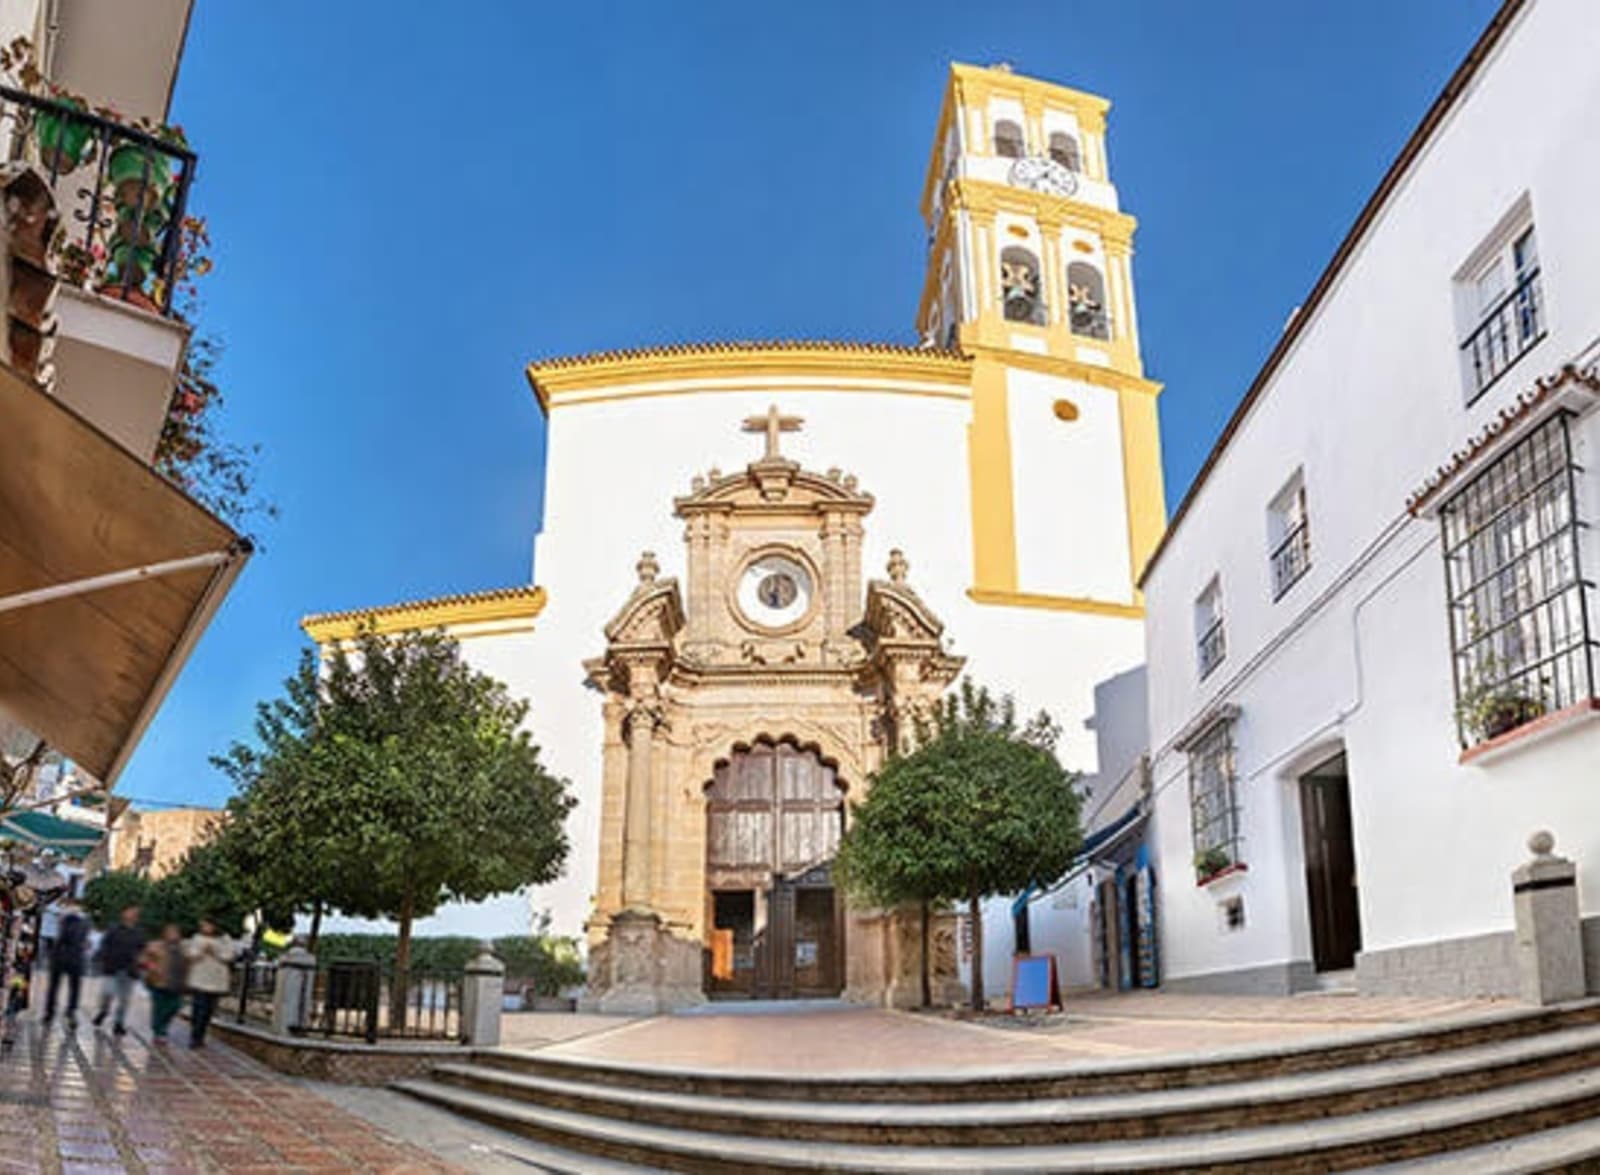 RS-Church-of-Our-Lady-of-the-Incarnation-Marbella-shutterstock_571498945.jpg